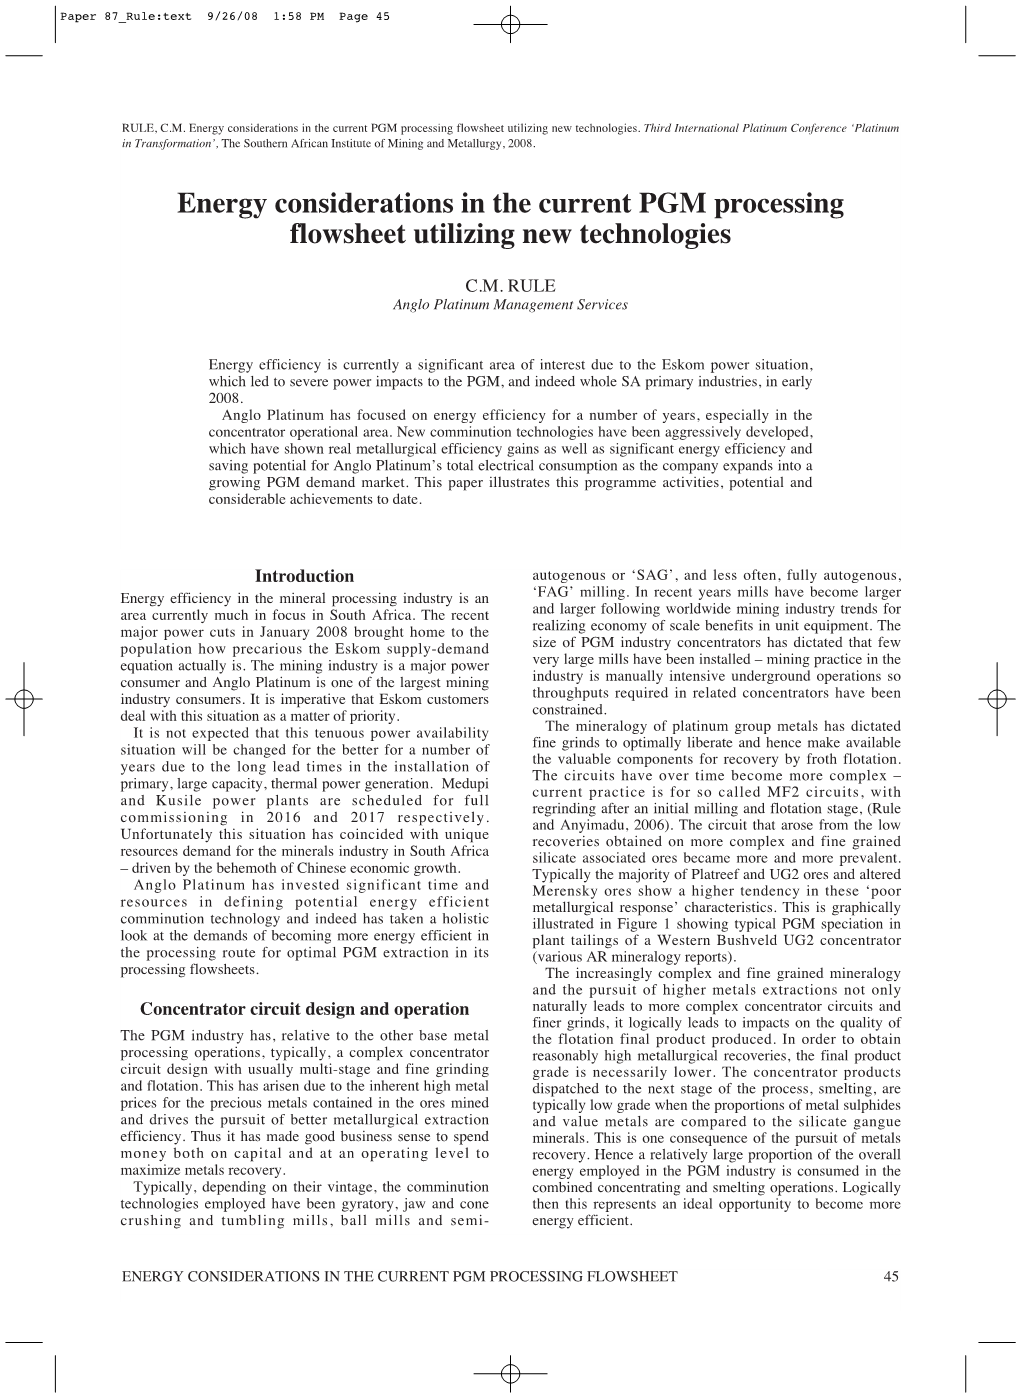 Energy Considerations in the Current PGM Processing Flowsheet Utilizing New Technologies